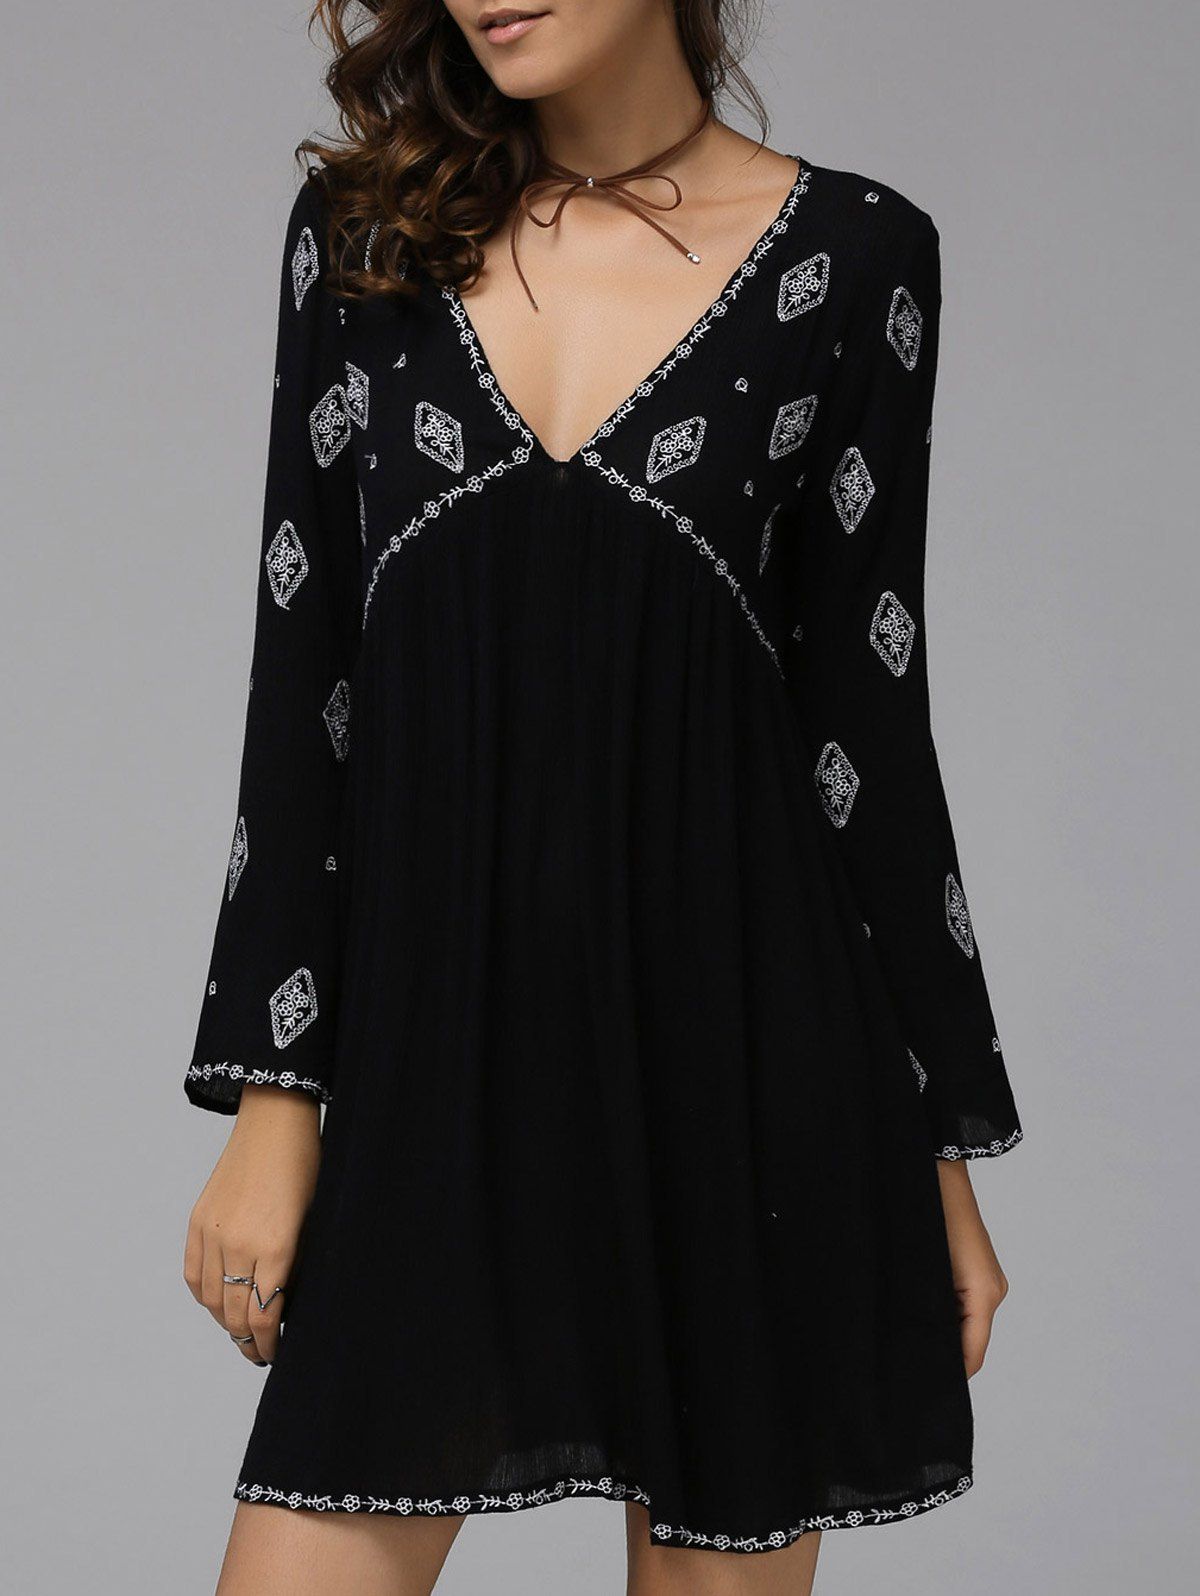 Fashionable Women's Plunging Neck Long Sleeve Embroidered Dress - BLACK M